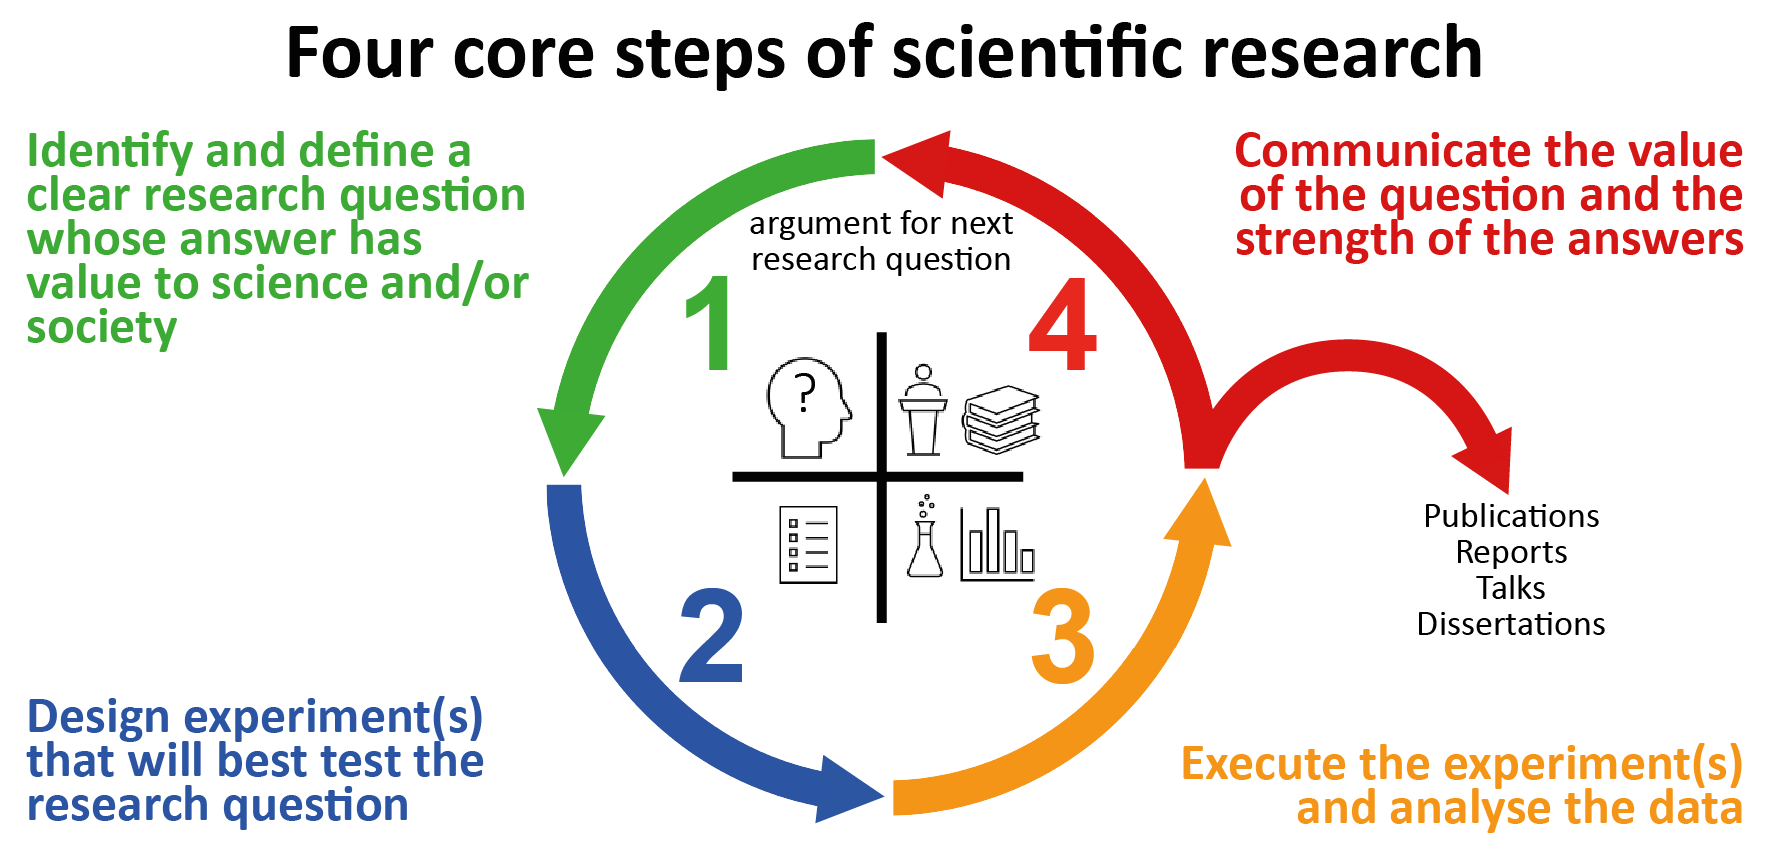 Four core steps of scientific research.